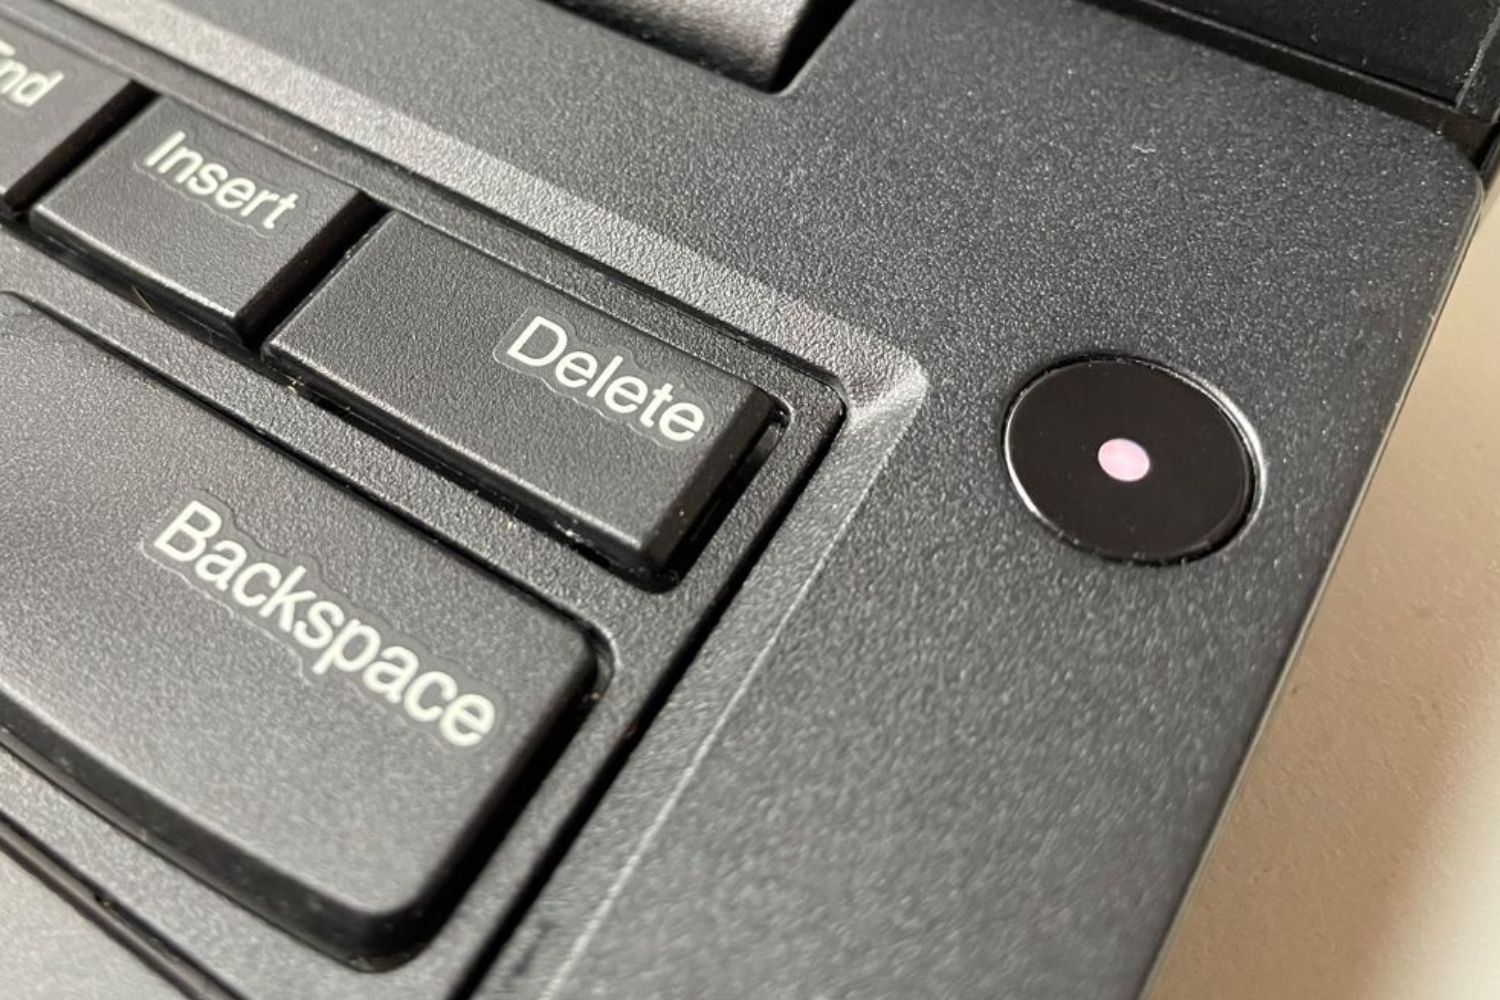 Where Is The Power Button On Lenovo Ultrabook